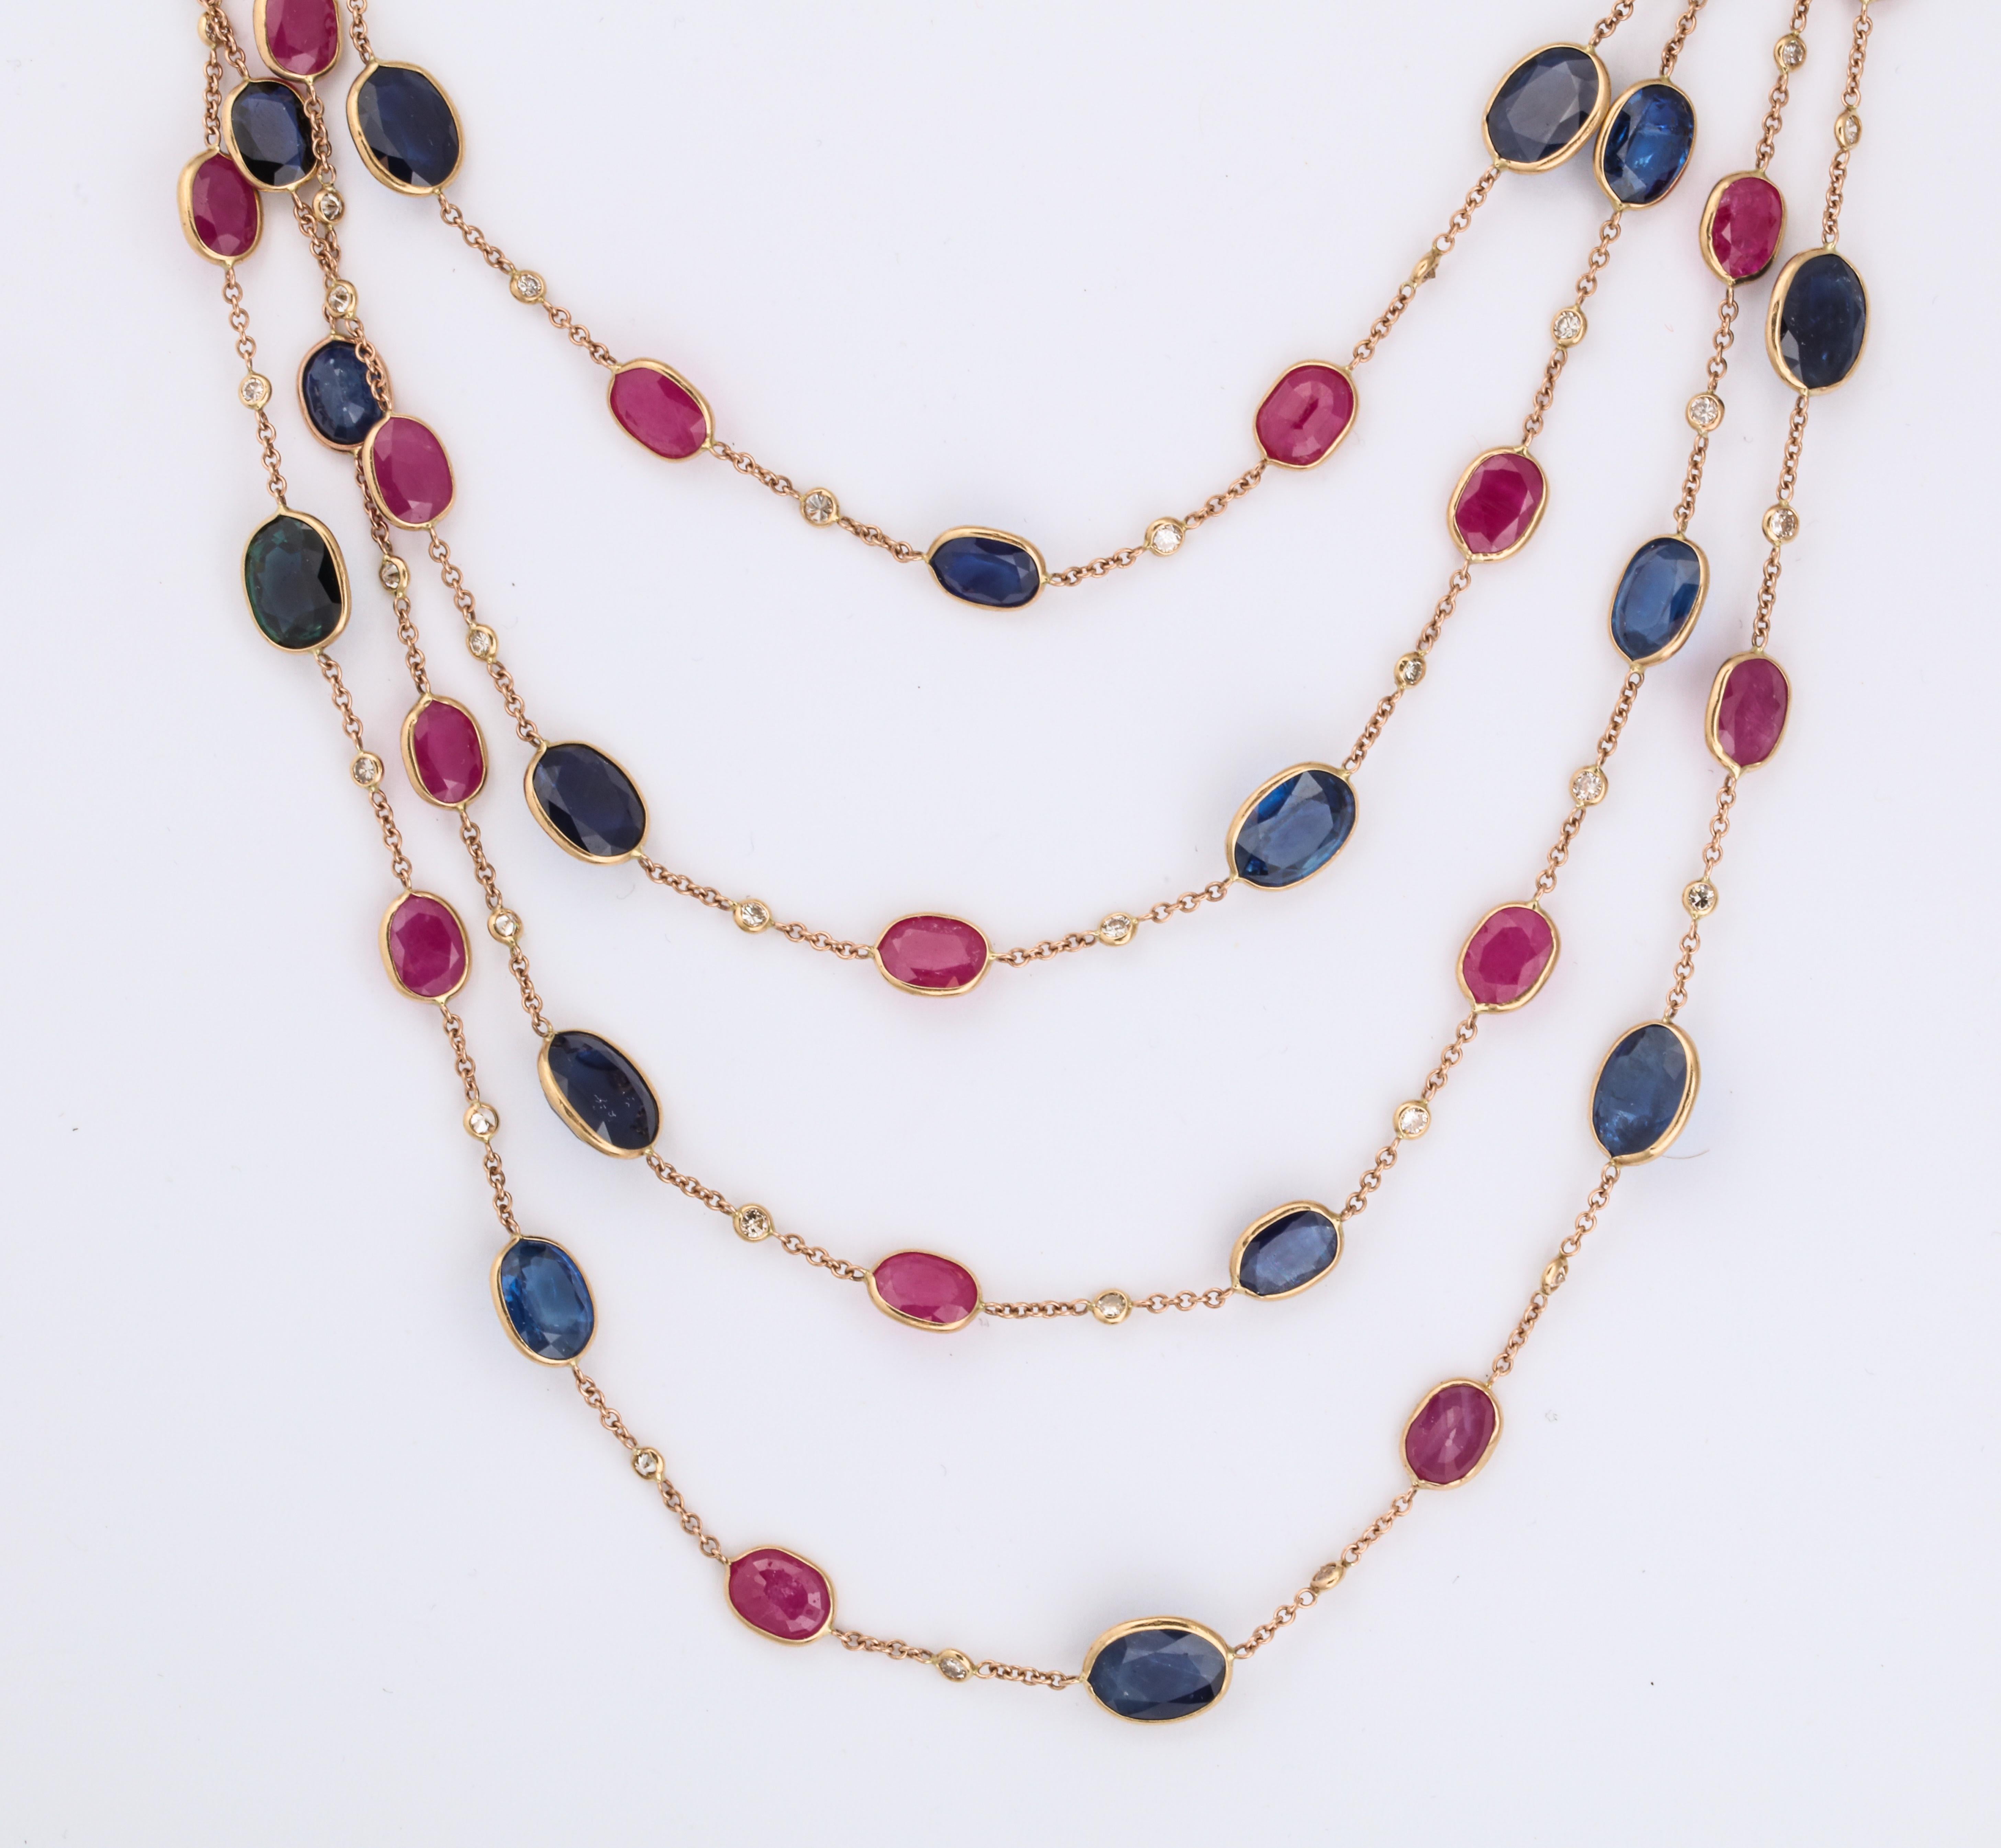 Superb length ruby, sapphire and diamond necklace mounted in pink gold

Approx 107.10 ct sapphire, 55.55 ct ruby, 3.85 ct diamond

The necklace is 42 inches (3 and a half feet) long!

Can be layered multiple times